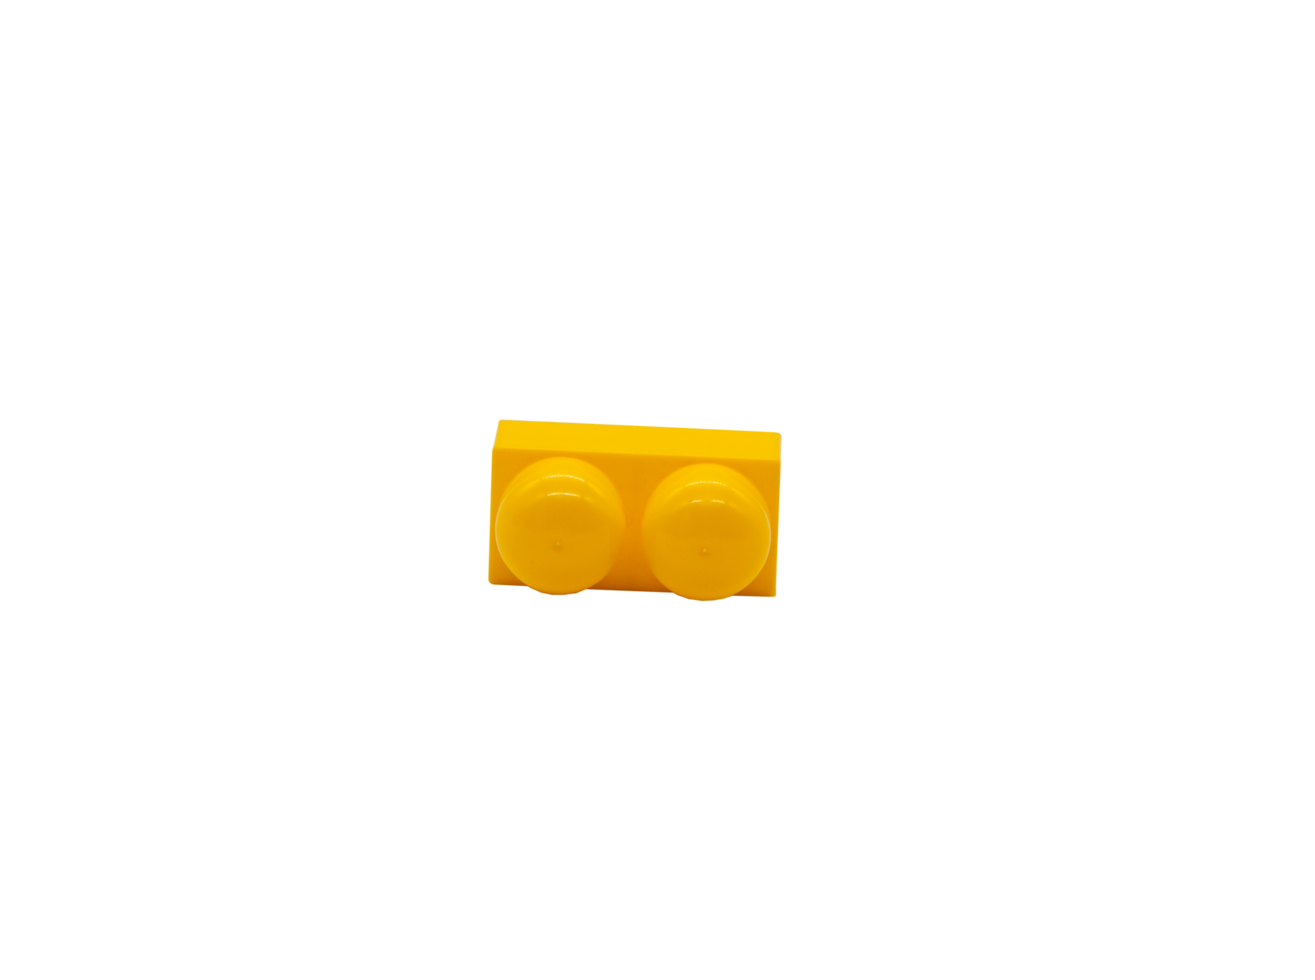 Children's toy construction set lego yellow without background. Detail of two sections. Image in high quality. Isolated. PNG